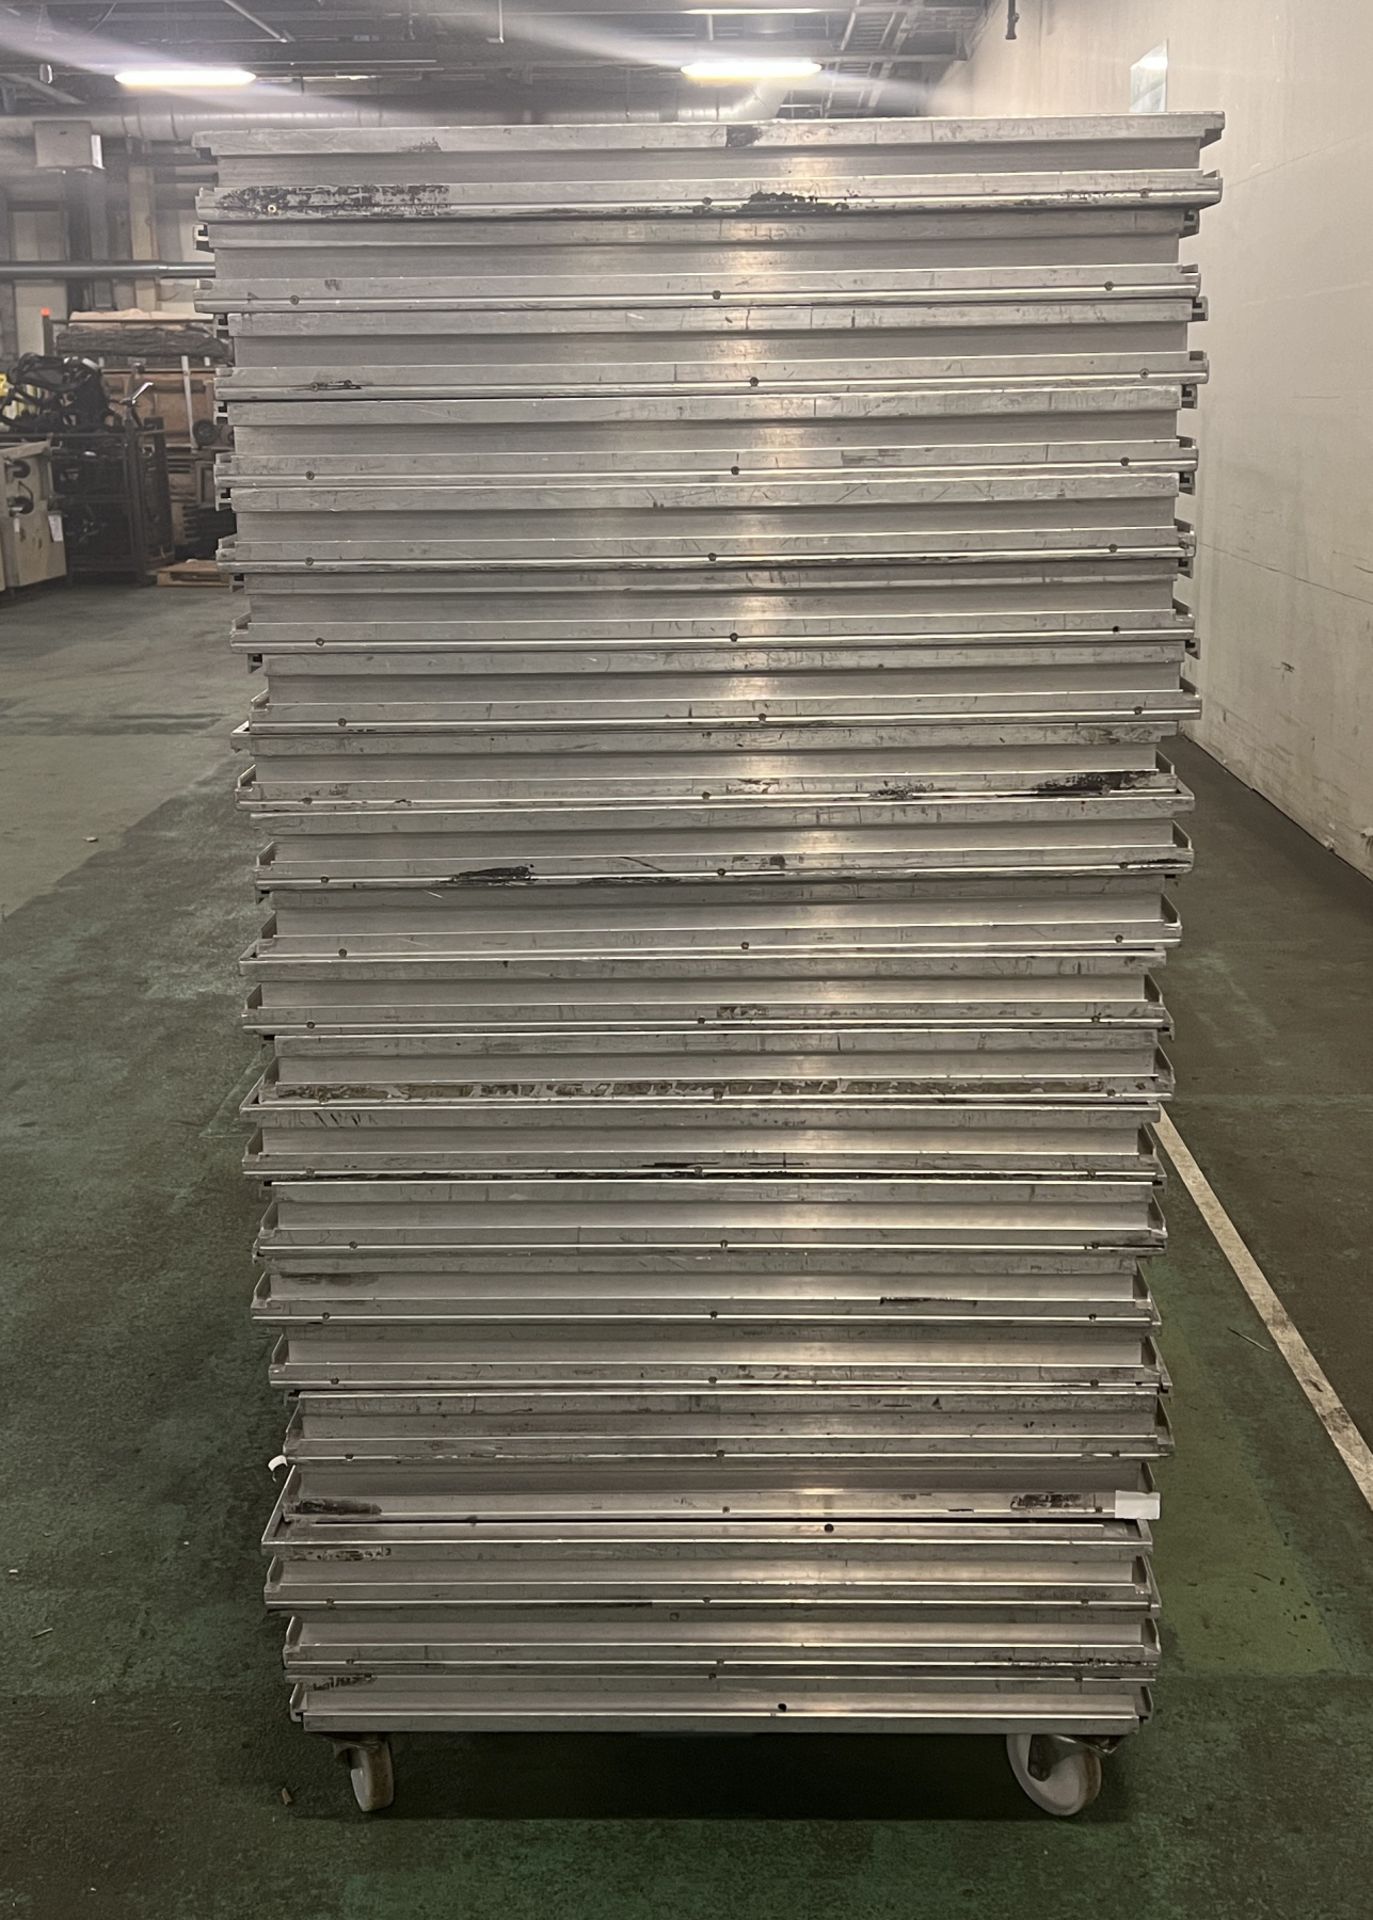 21x Aluminium stage/platform deck sections - W 2000 x D 1000 x H 85mm per section - NO STANDS/FEET - Image 2 of 9